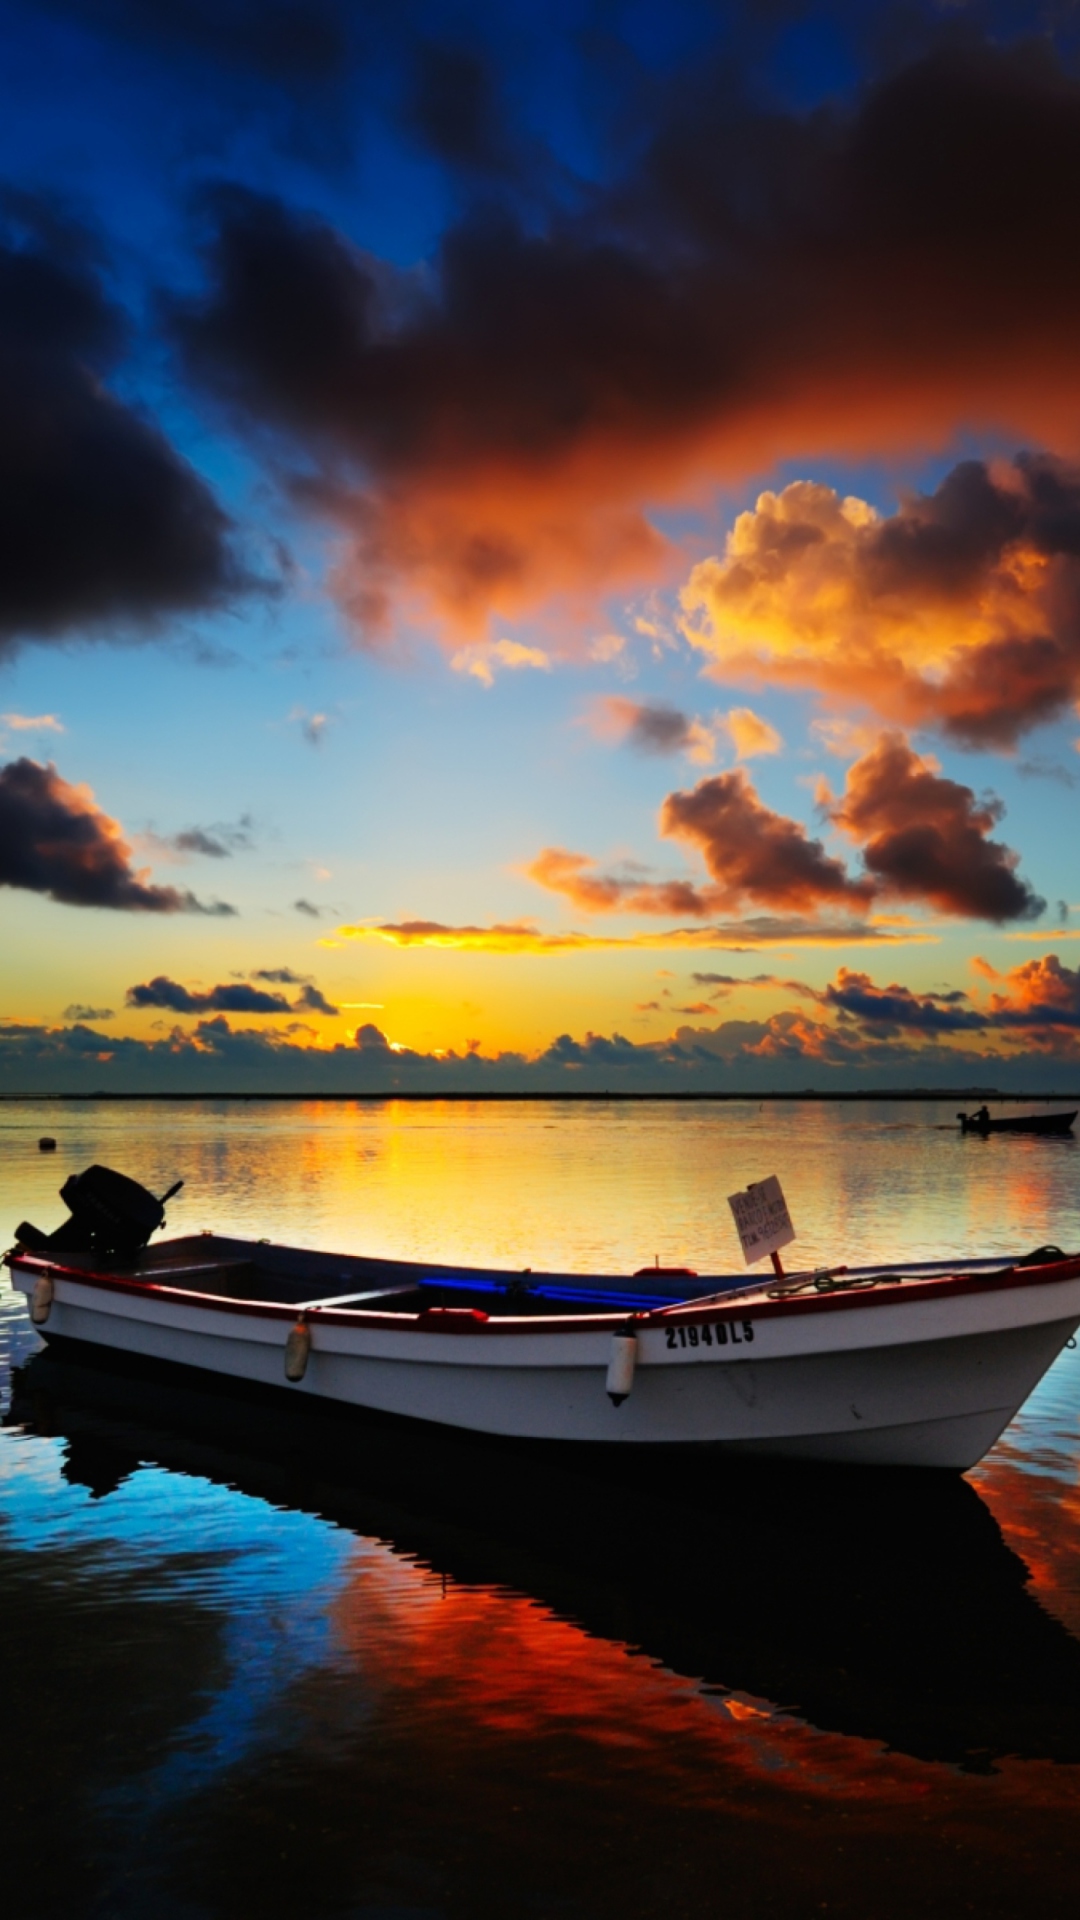 Das Boat In Sea At Sunset Wallpaper 1080x1920